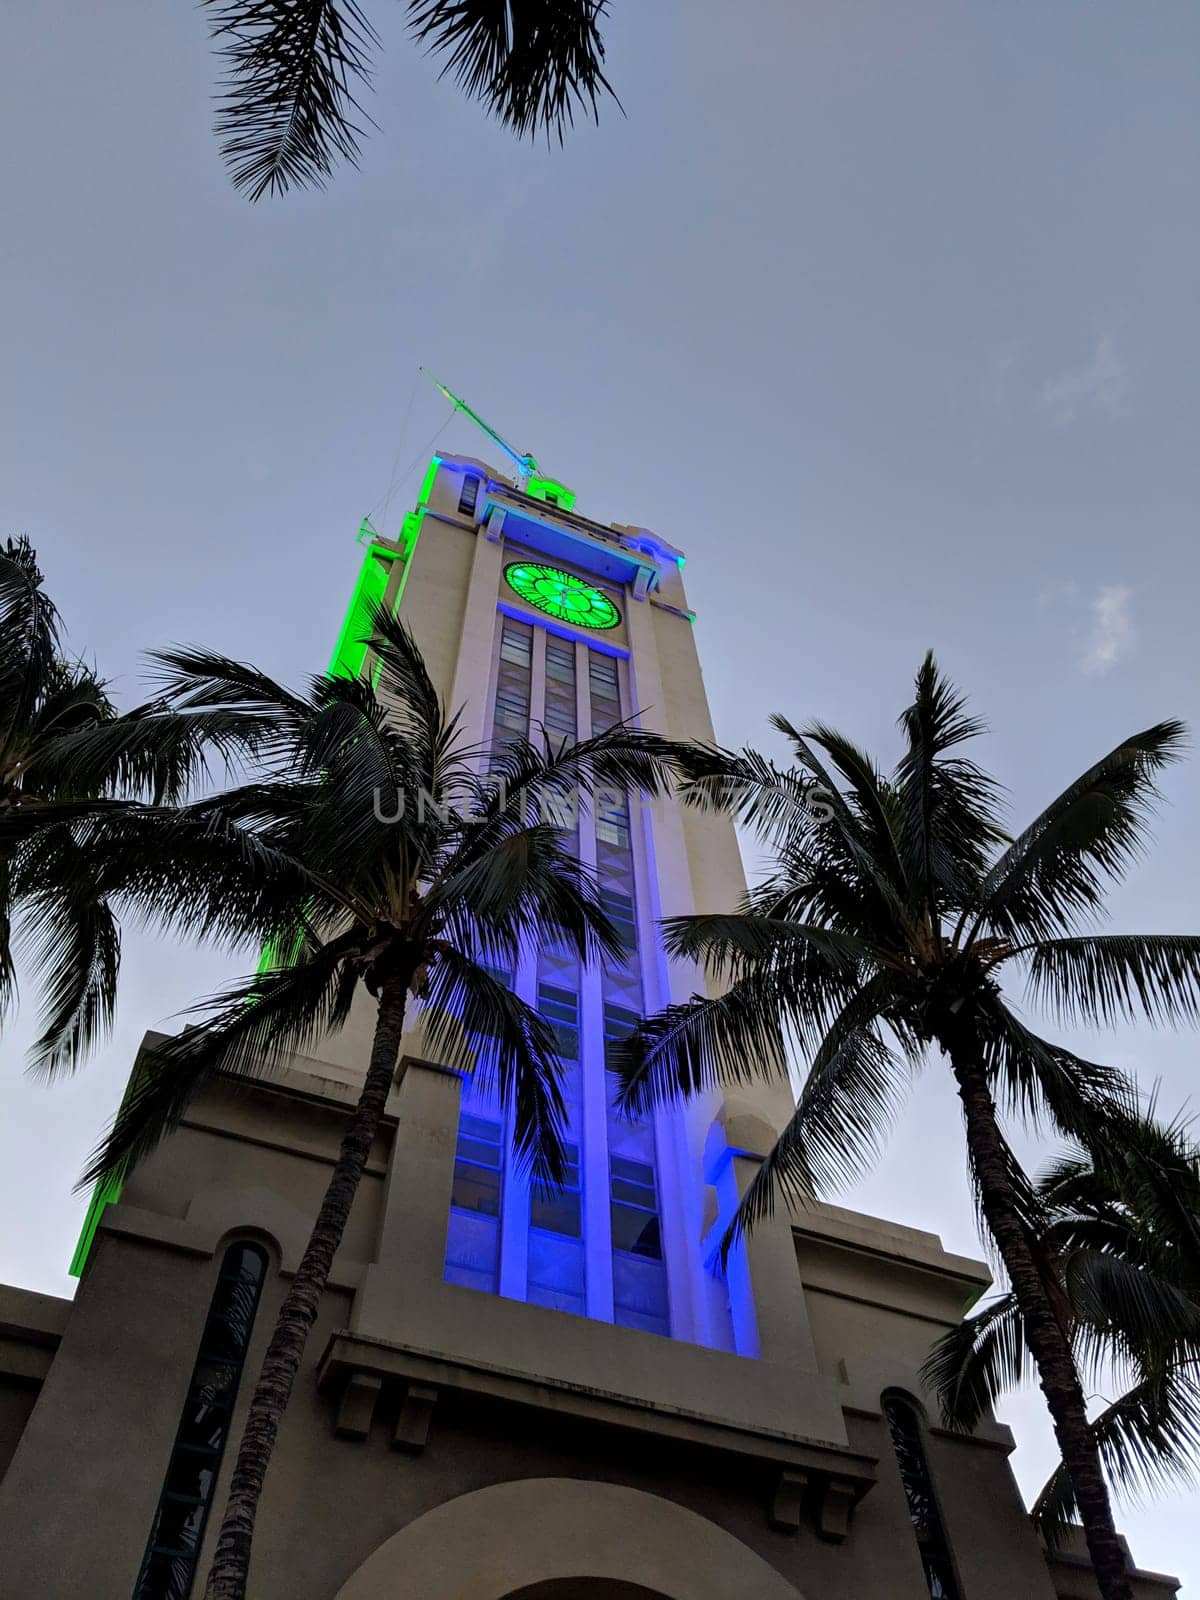 Honolulu - November 3, 2018:   Aloha Tower in Honolulu, Hawaii lit up with blue and green lights at night. The tower is framed by palm trees on either side.